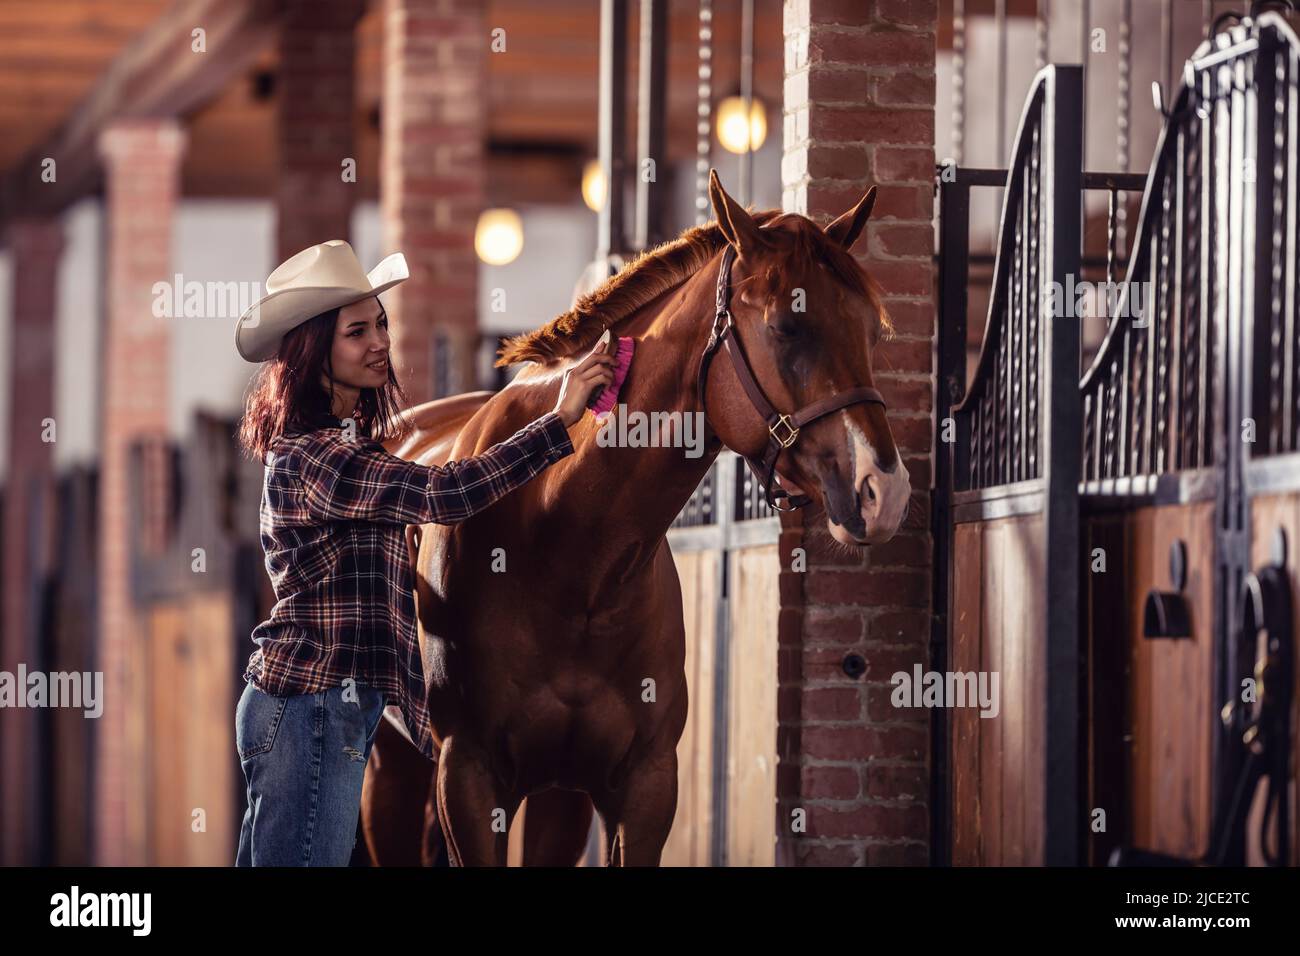 Good looking girl combs a paint horse inside a well-maintained stable. Stock Photo